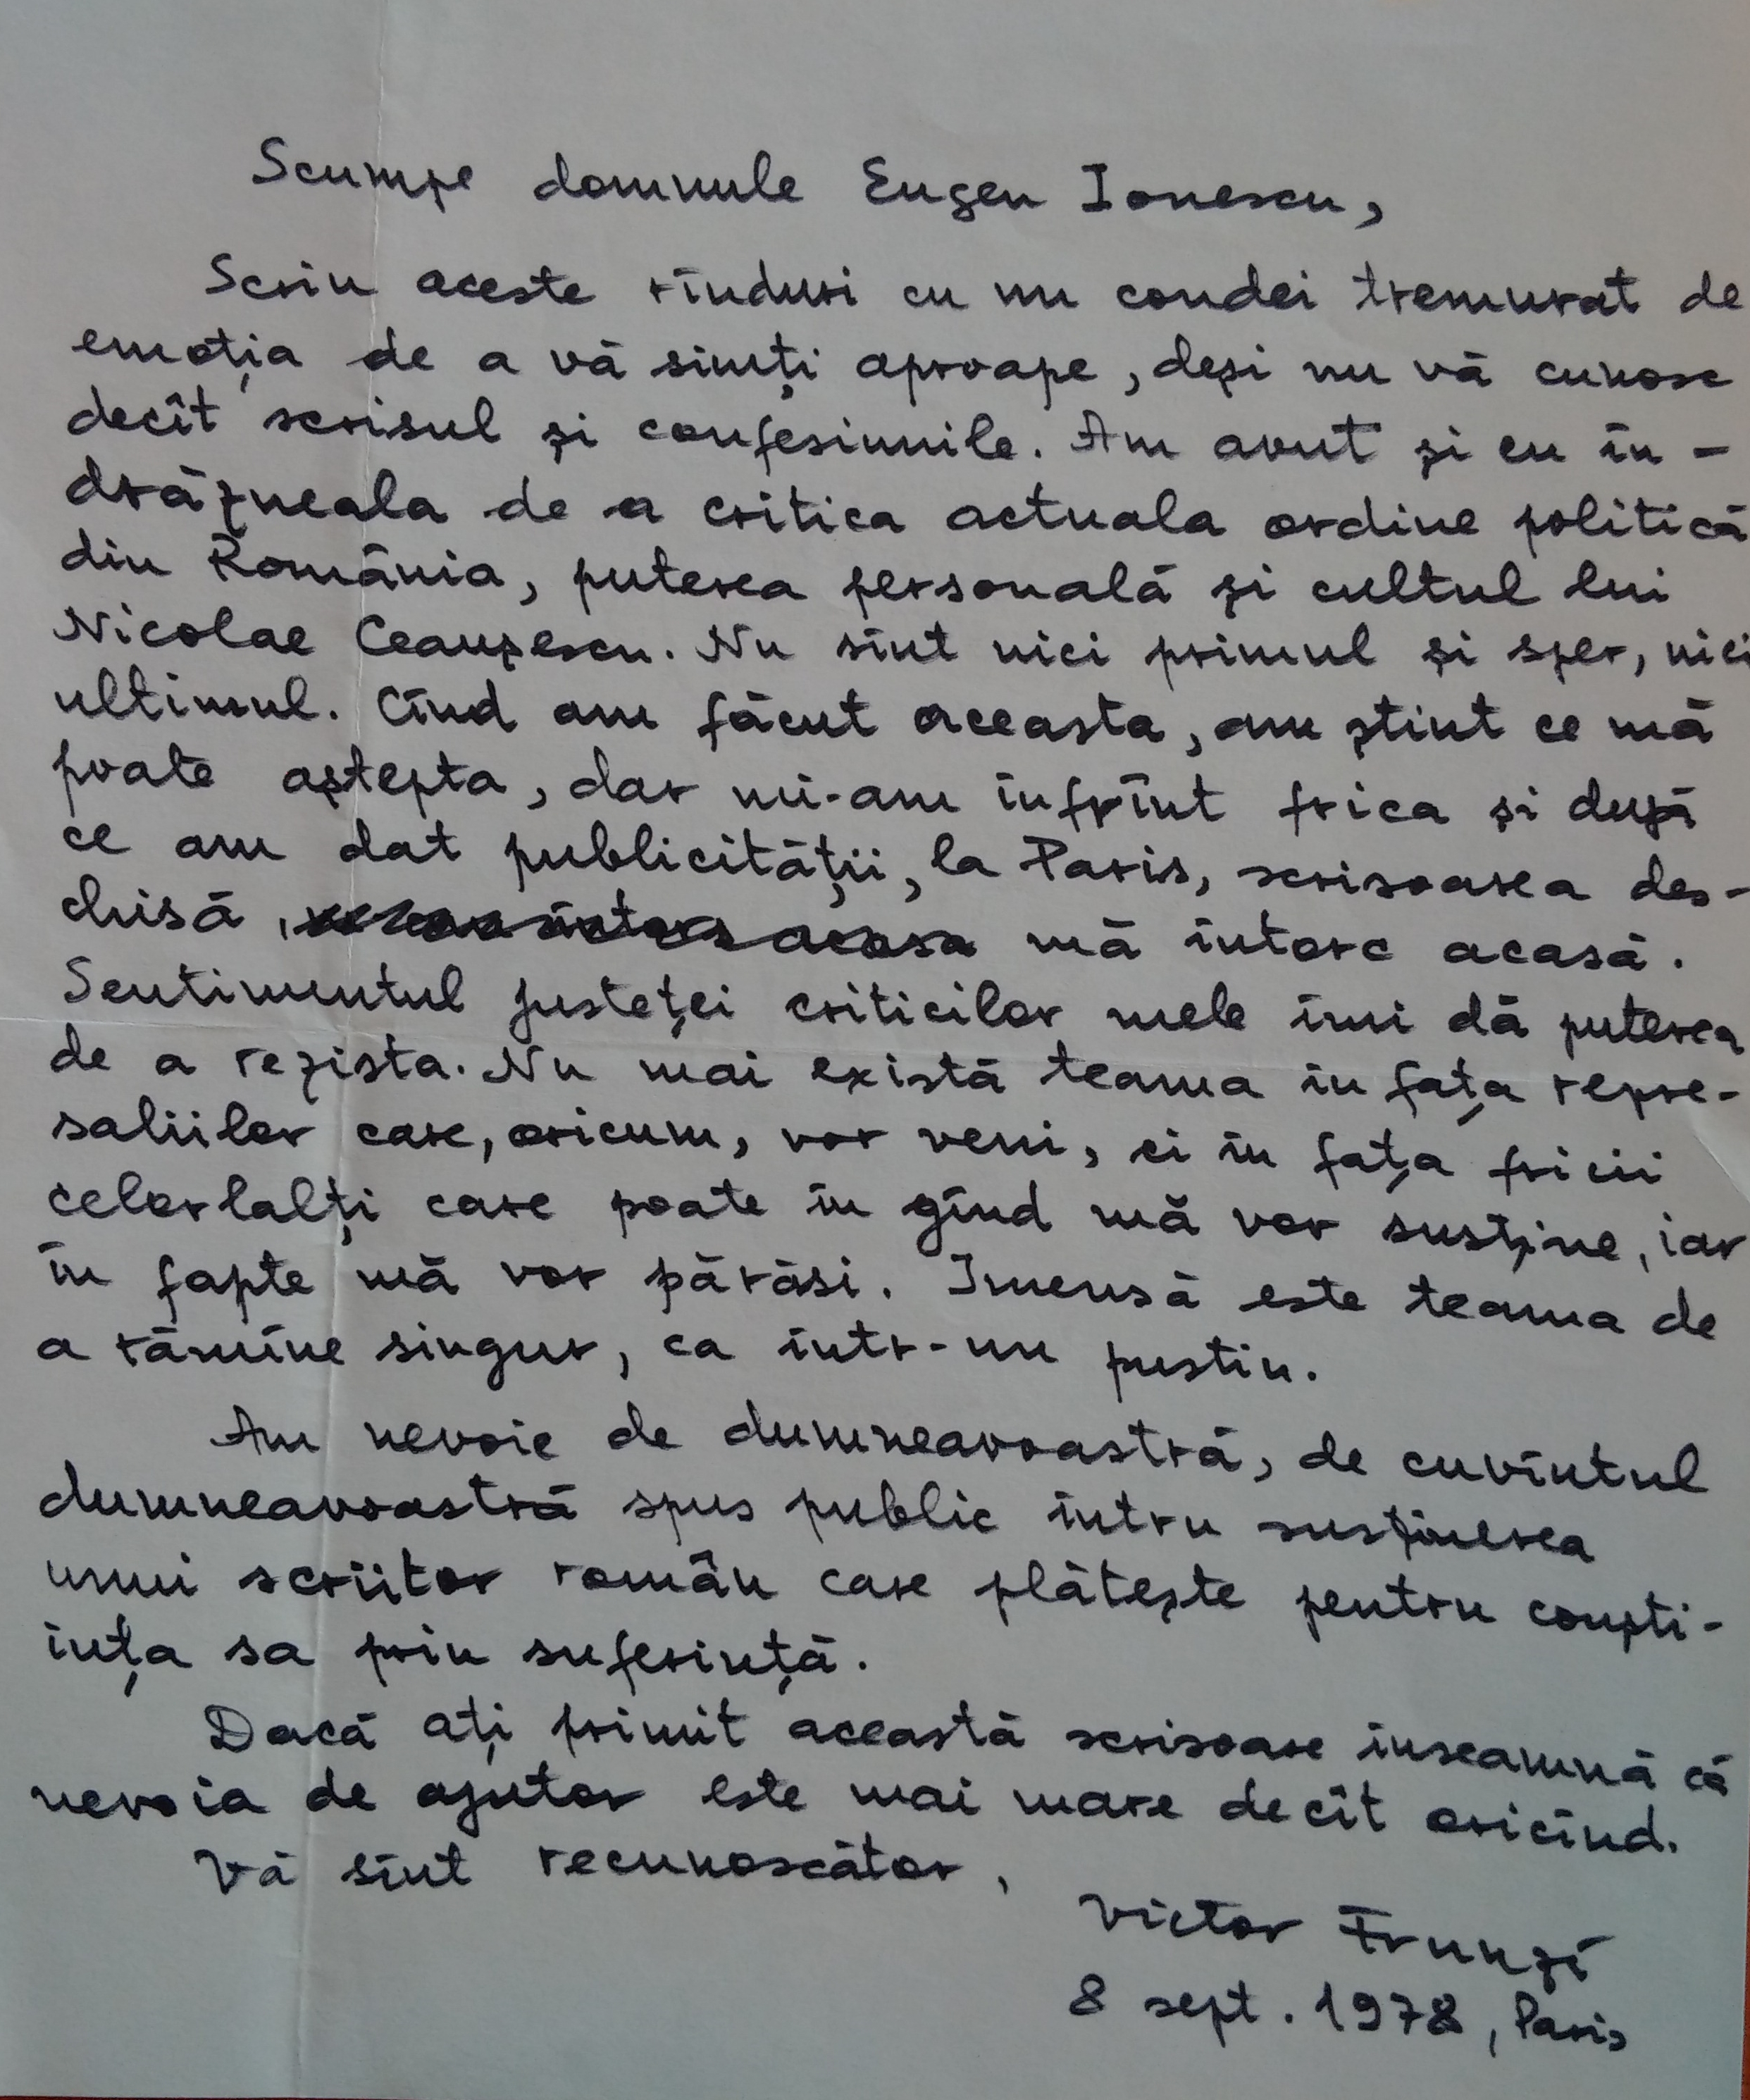 Letter from Victor Frunză to Eugen Ionescu in Paris, 8 September 1978